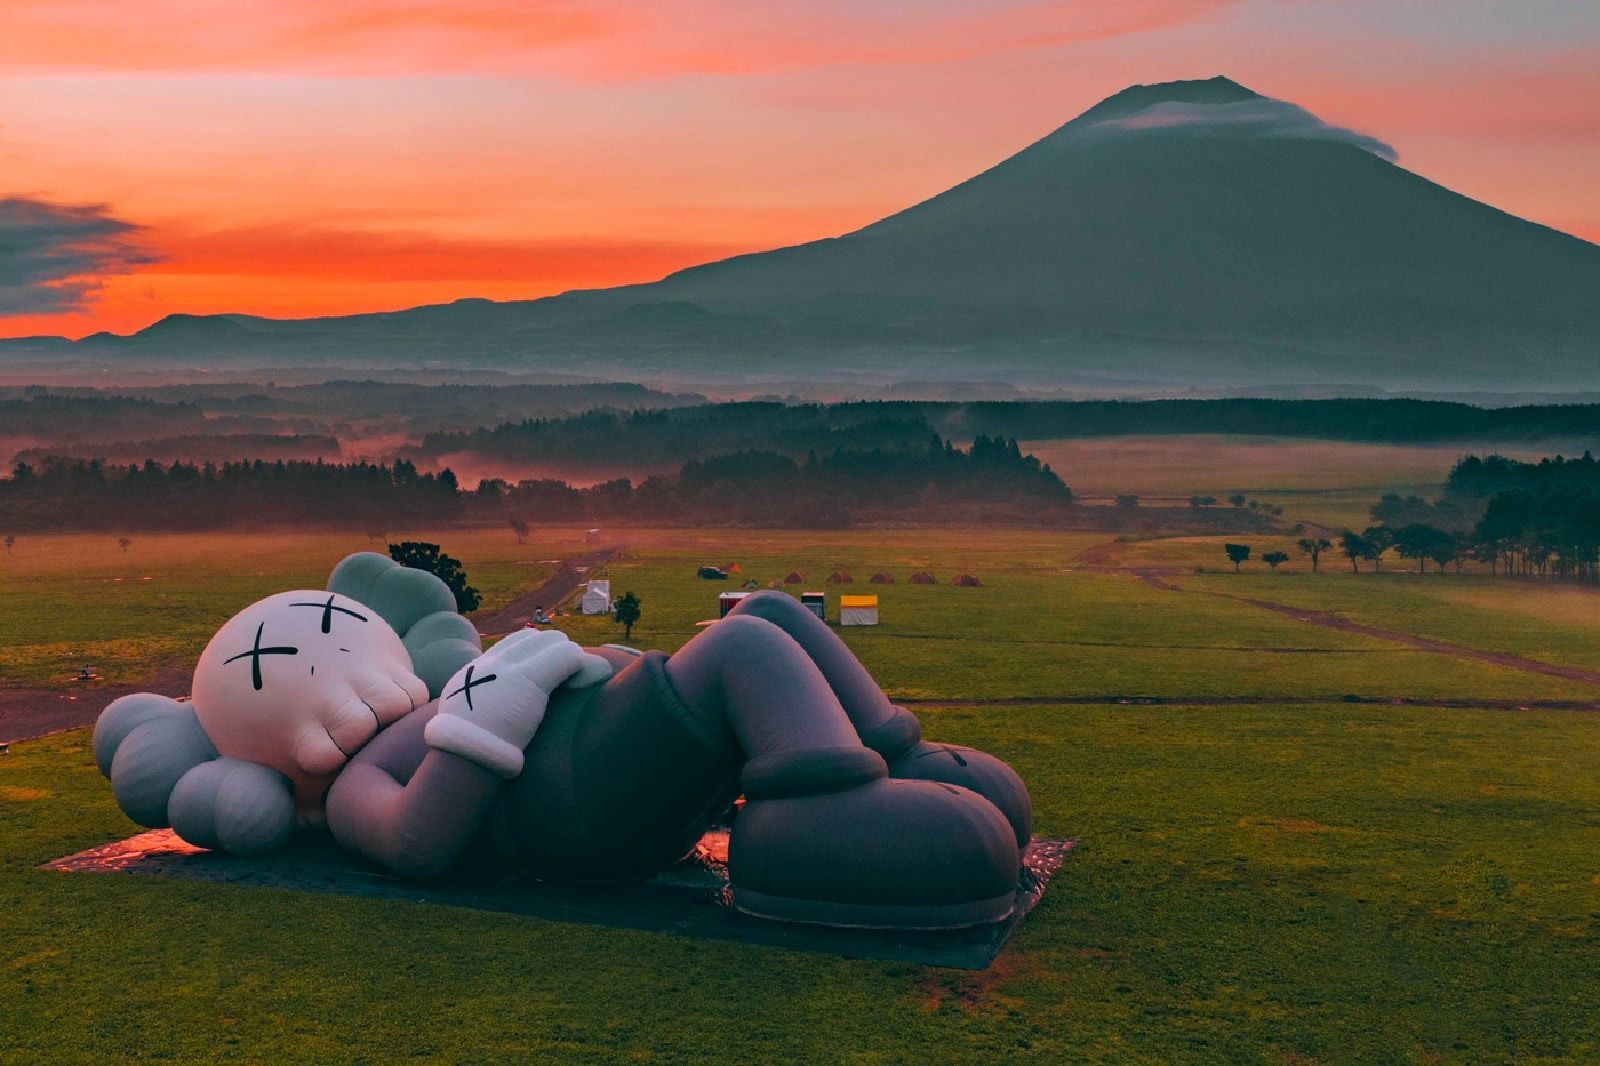 KAWS's latest installation has reached Mount Fuji The sculpture HOLIDAY makes the natural beauty of the landscape even more unique